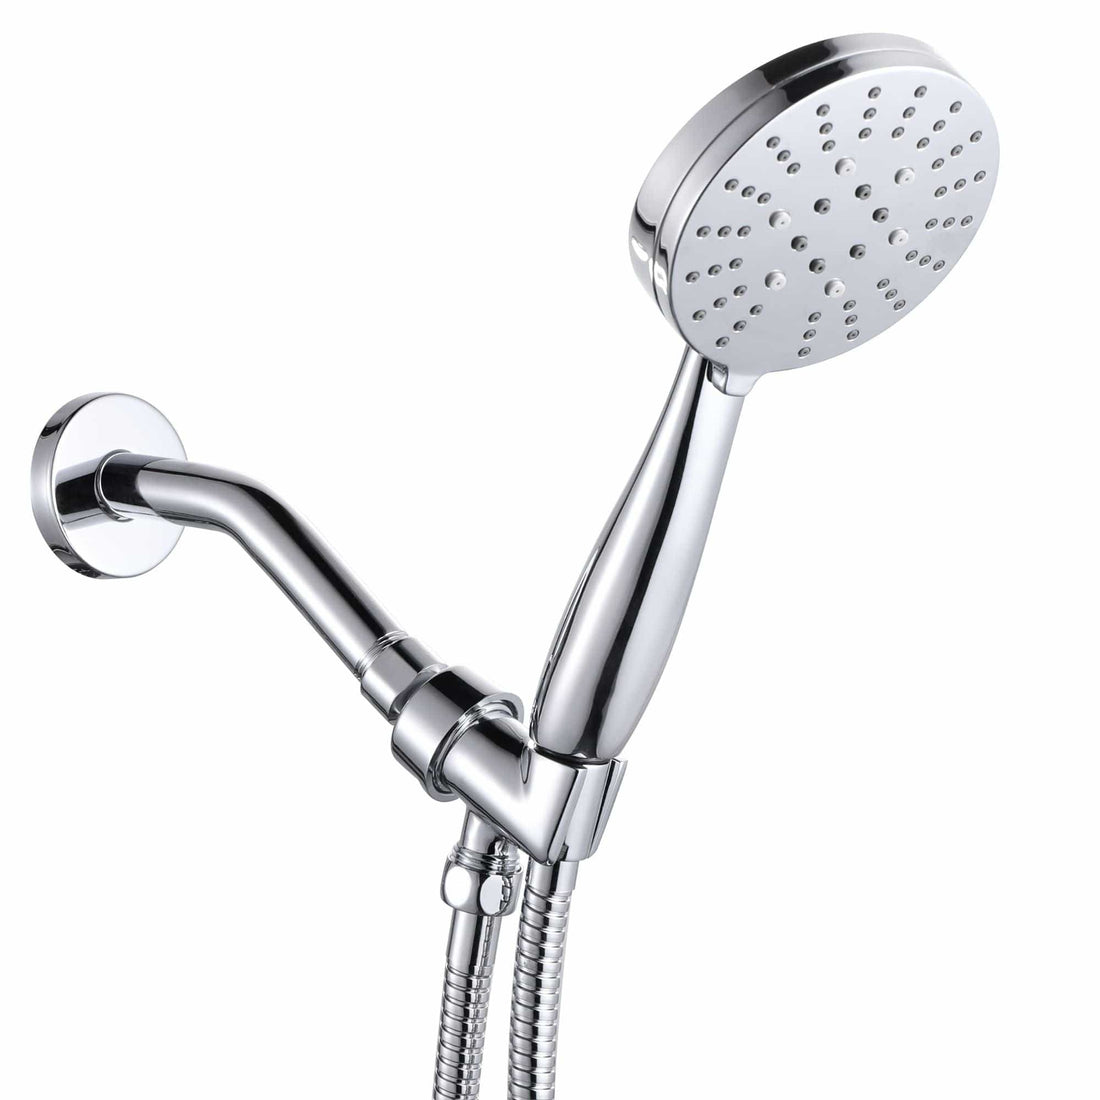 HammerHead Showers All Metal Hand Held Shower Head with Hose and Holder,  Brushed Nickel, 1.75 GPM Low Flow with Removable Restrictor